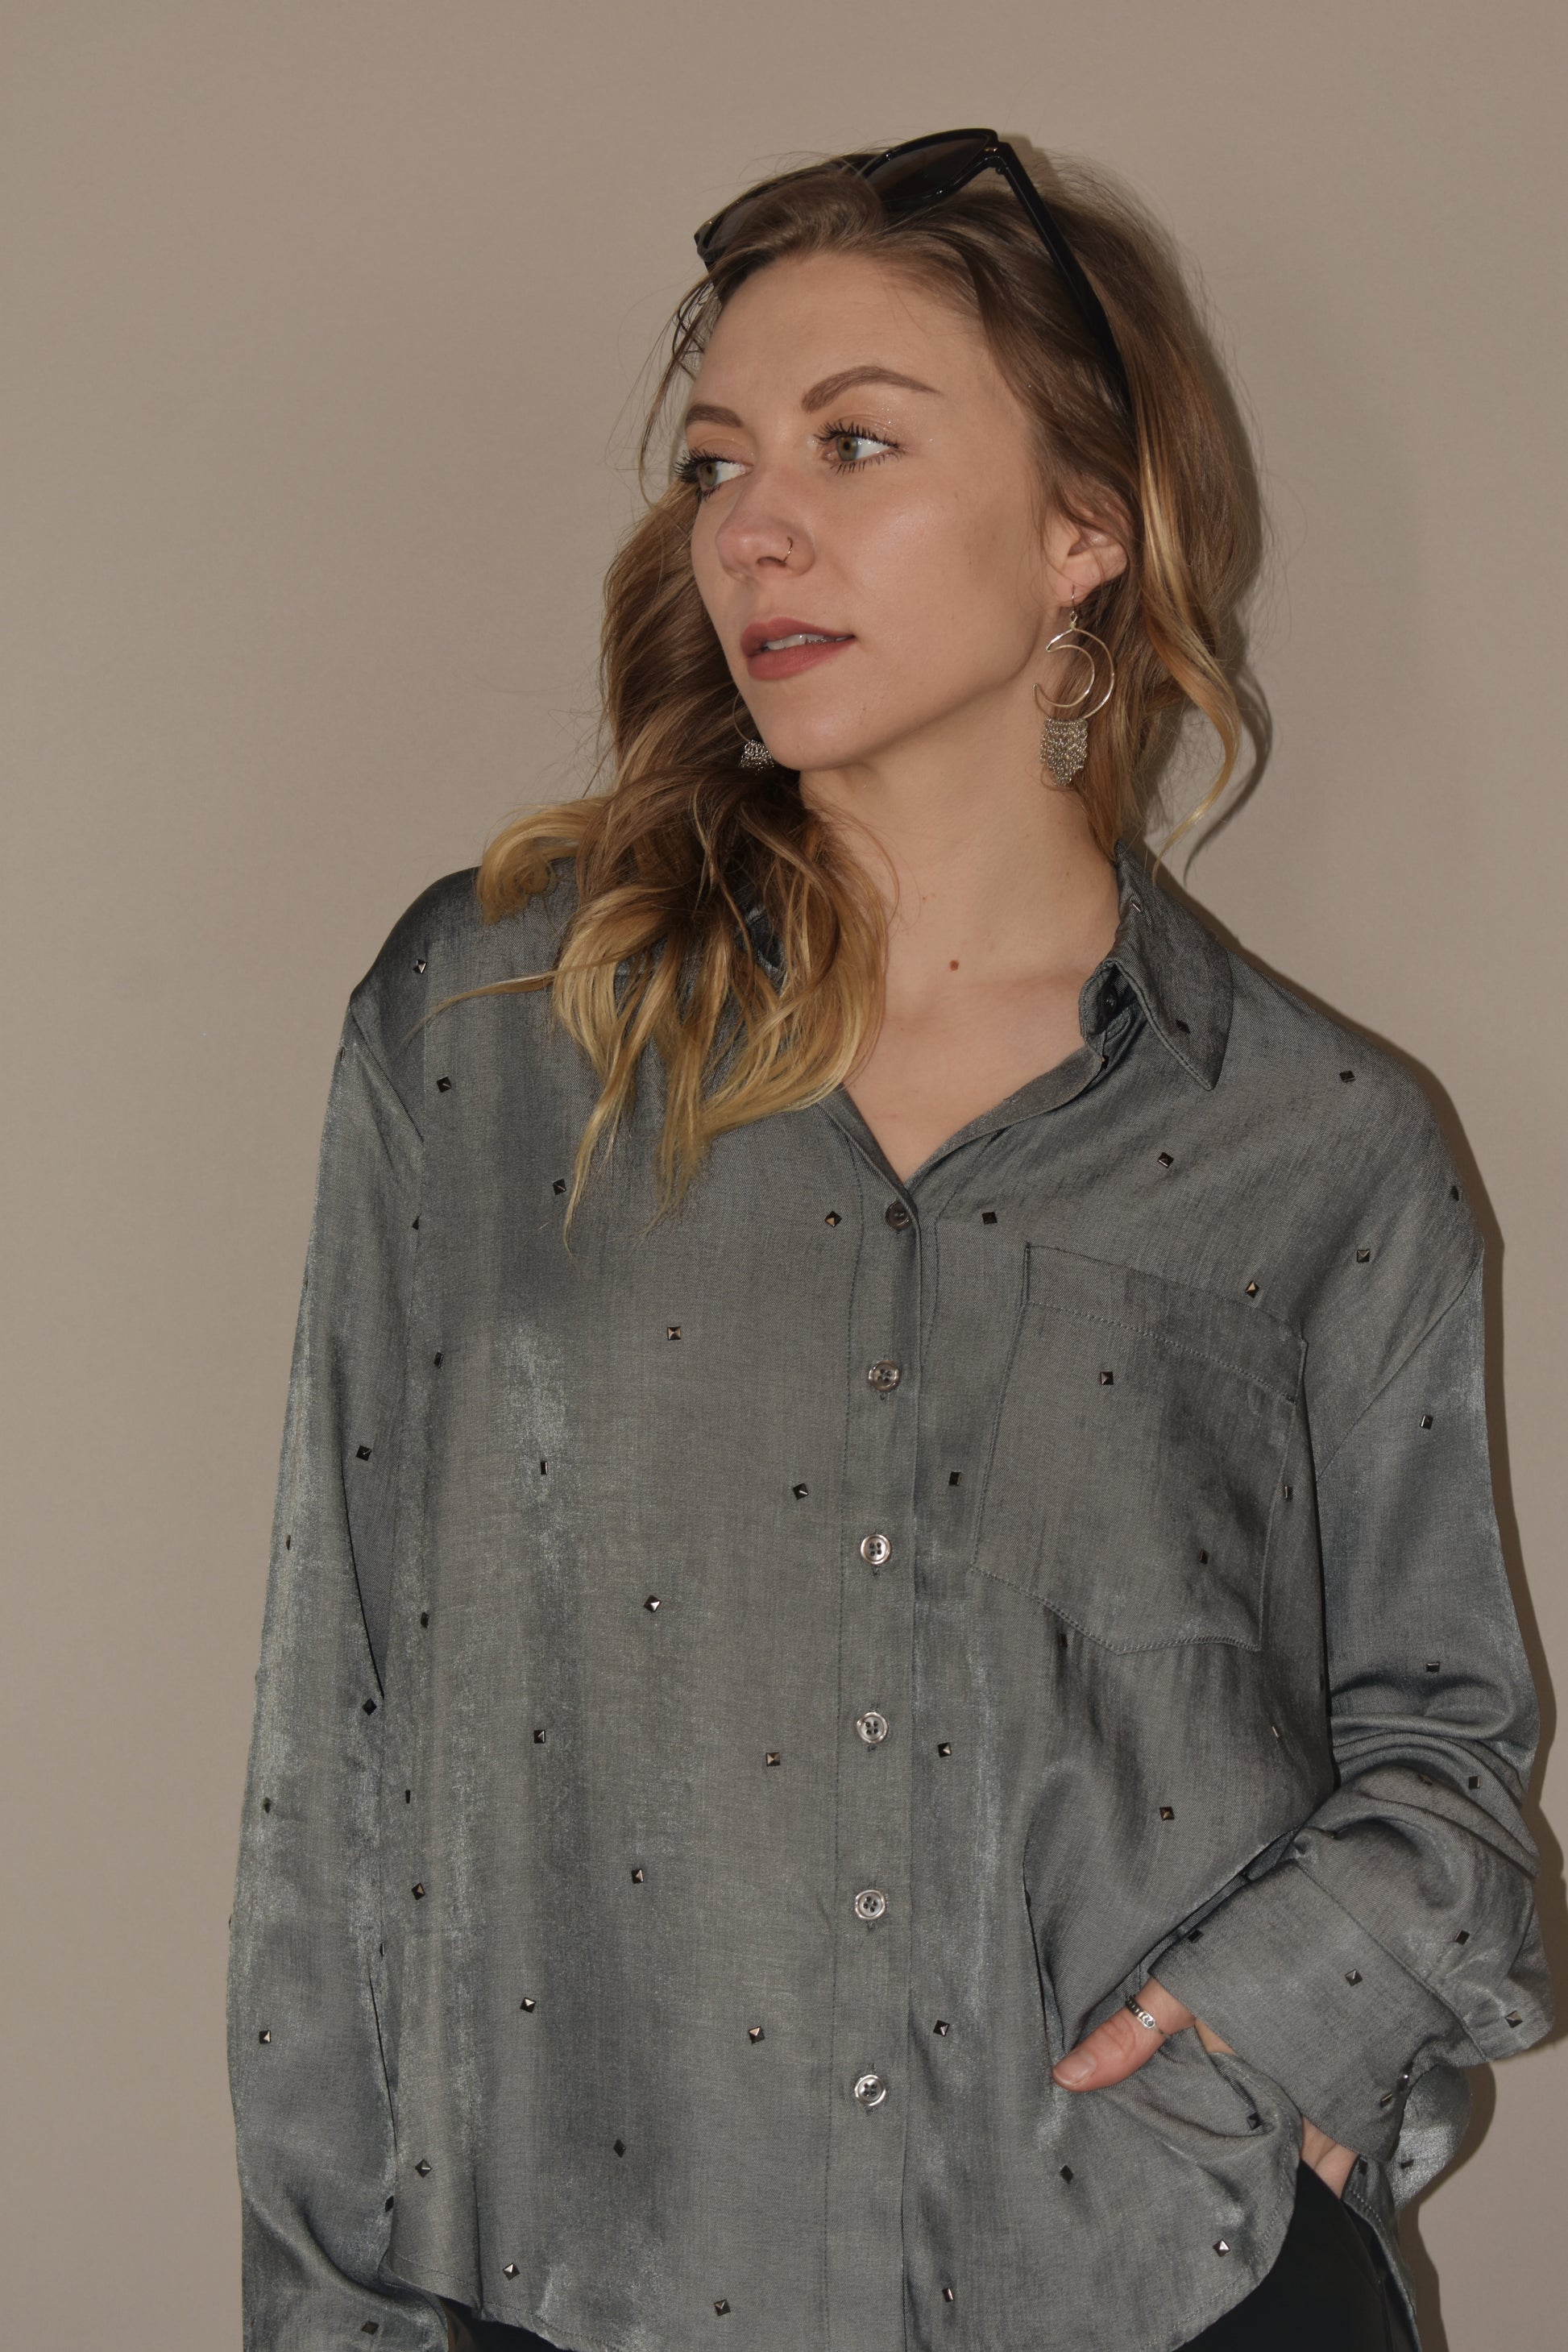 long sleeve relaxed fit full length charcoal button down. small silver studs all over the shirt. one breast pocket. 